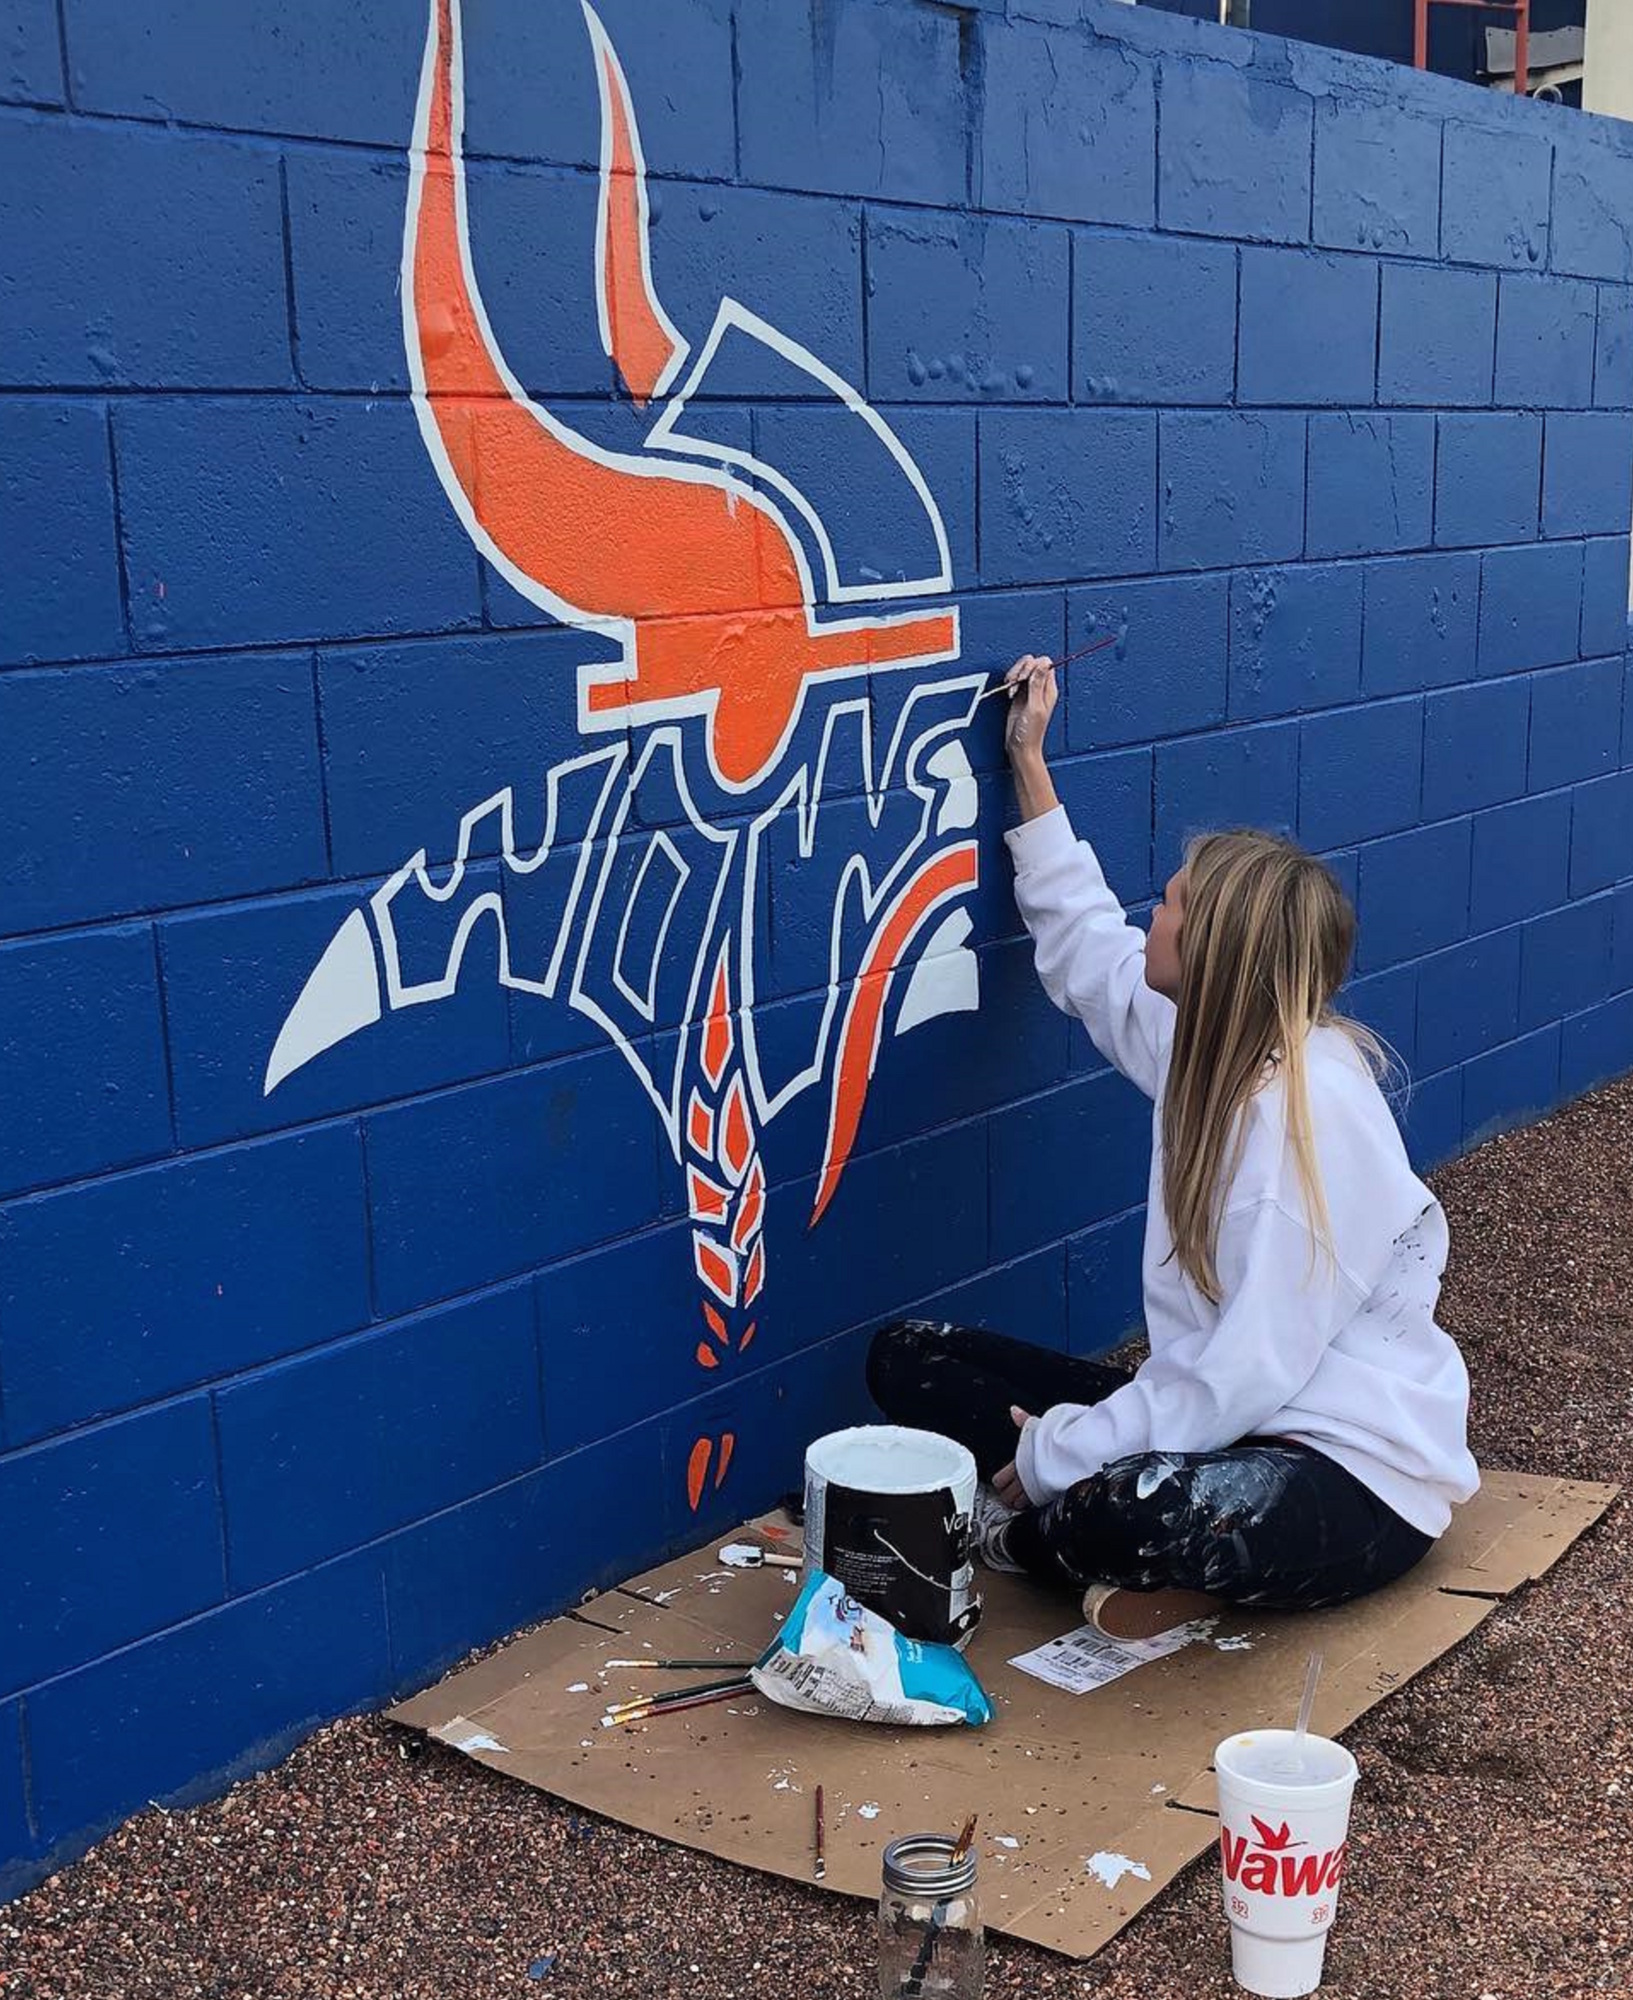 Emma Lewandowski spent about a week during the holiday break to paint the new mural at the West Orange High baseball field.